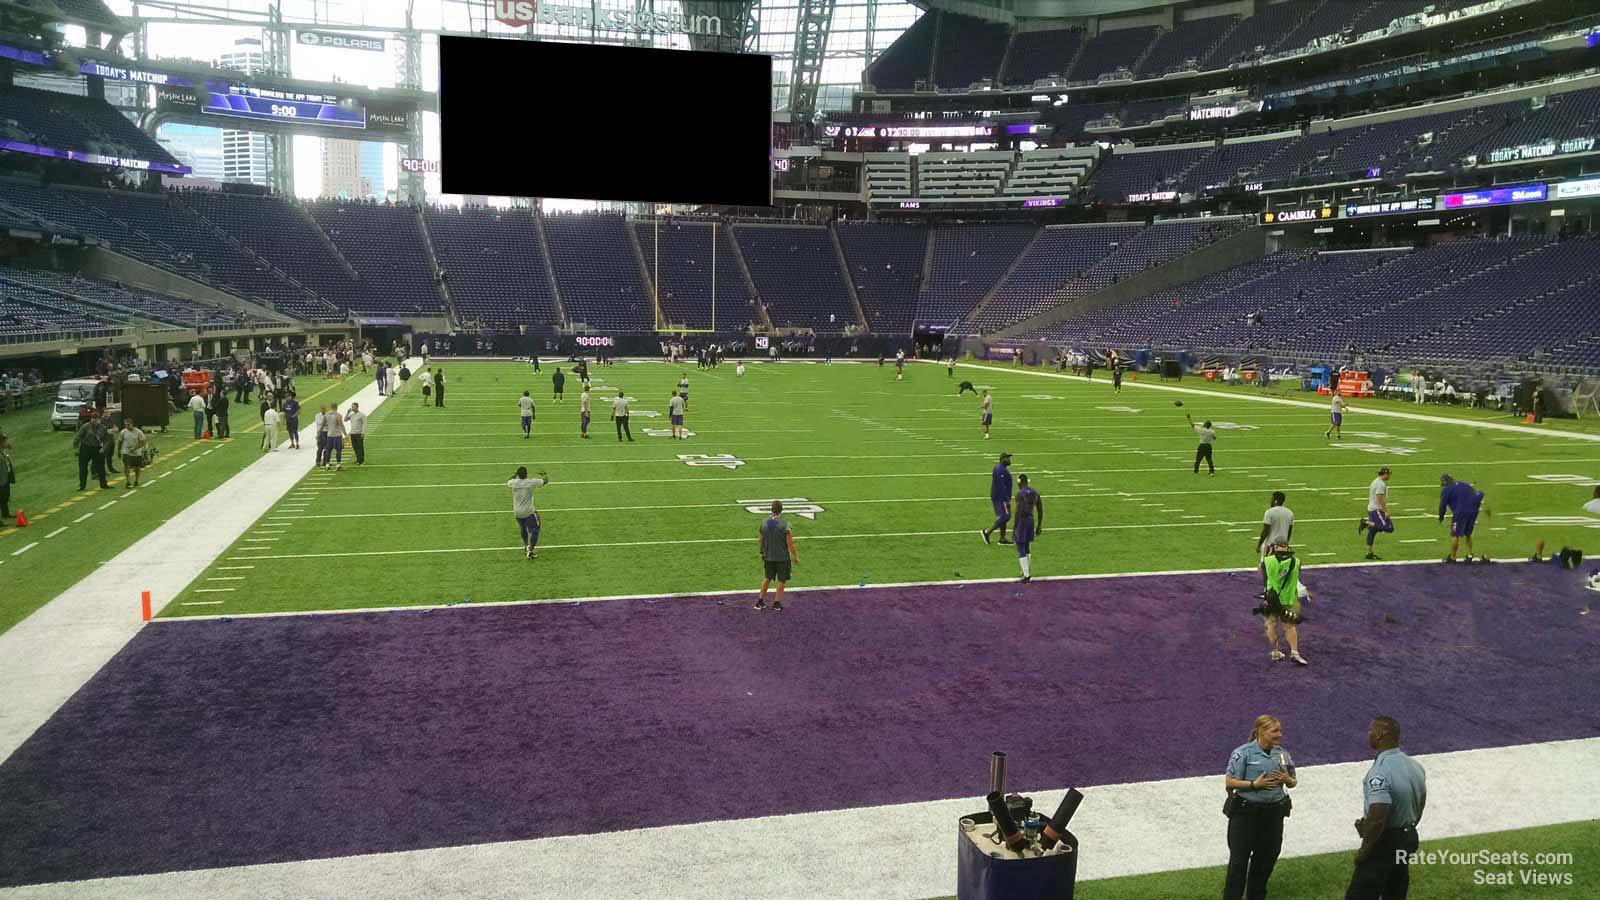 section 121, row 5 seat view  for football - u.s. bank stadium